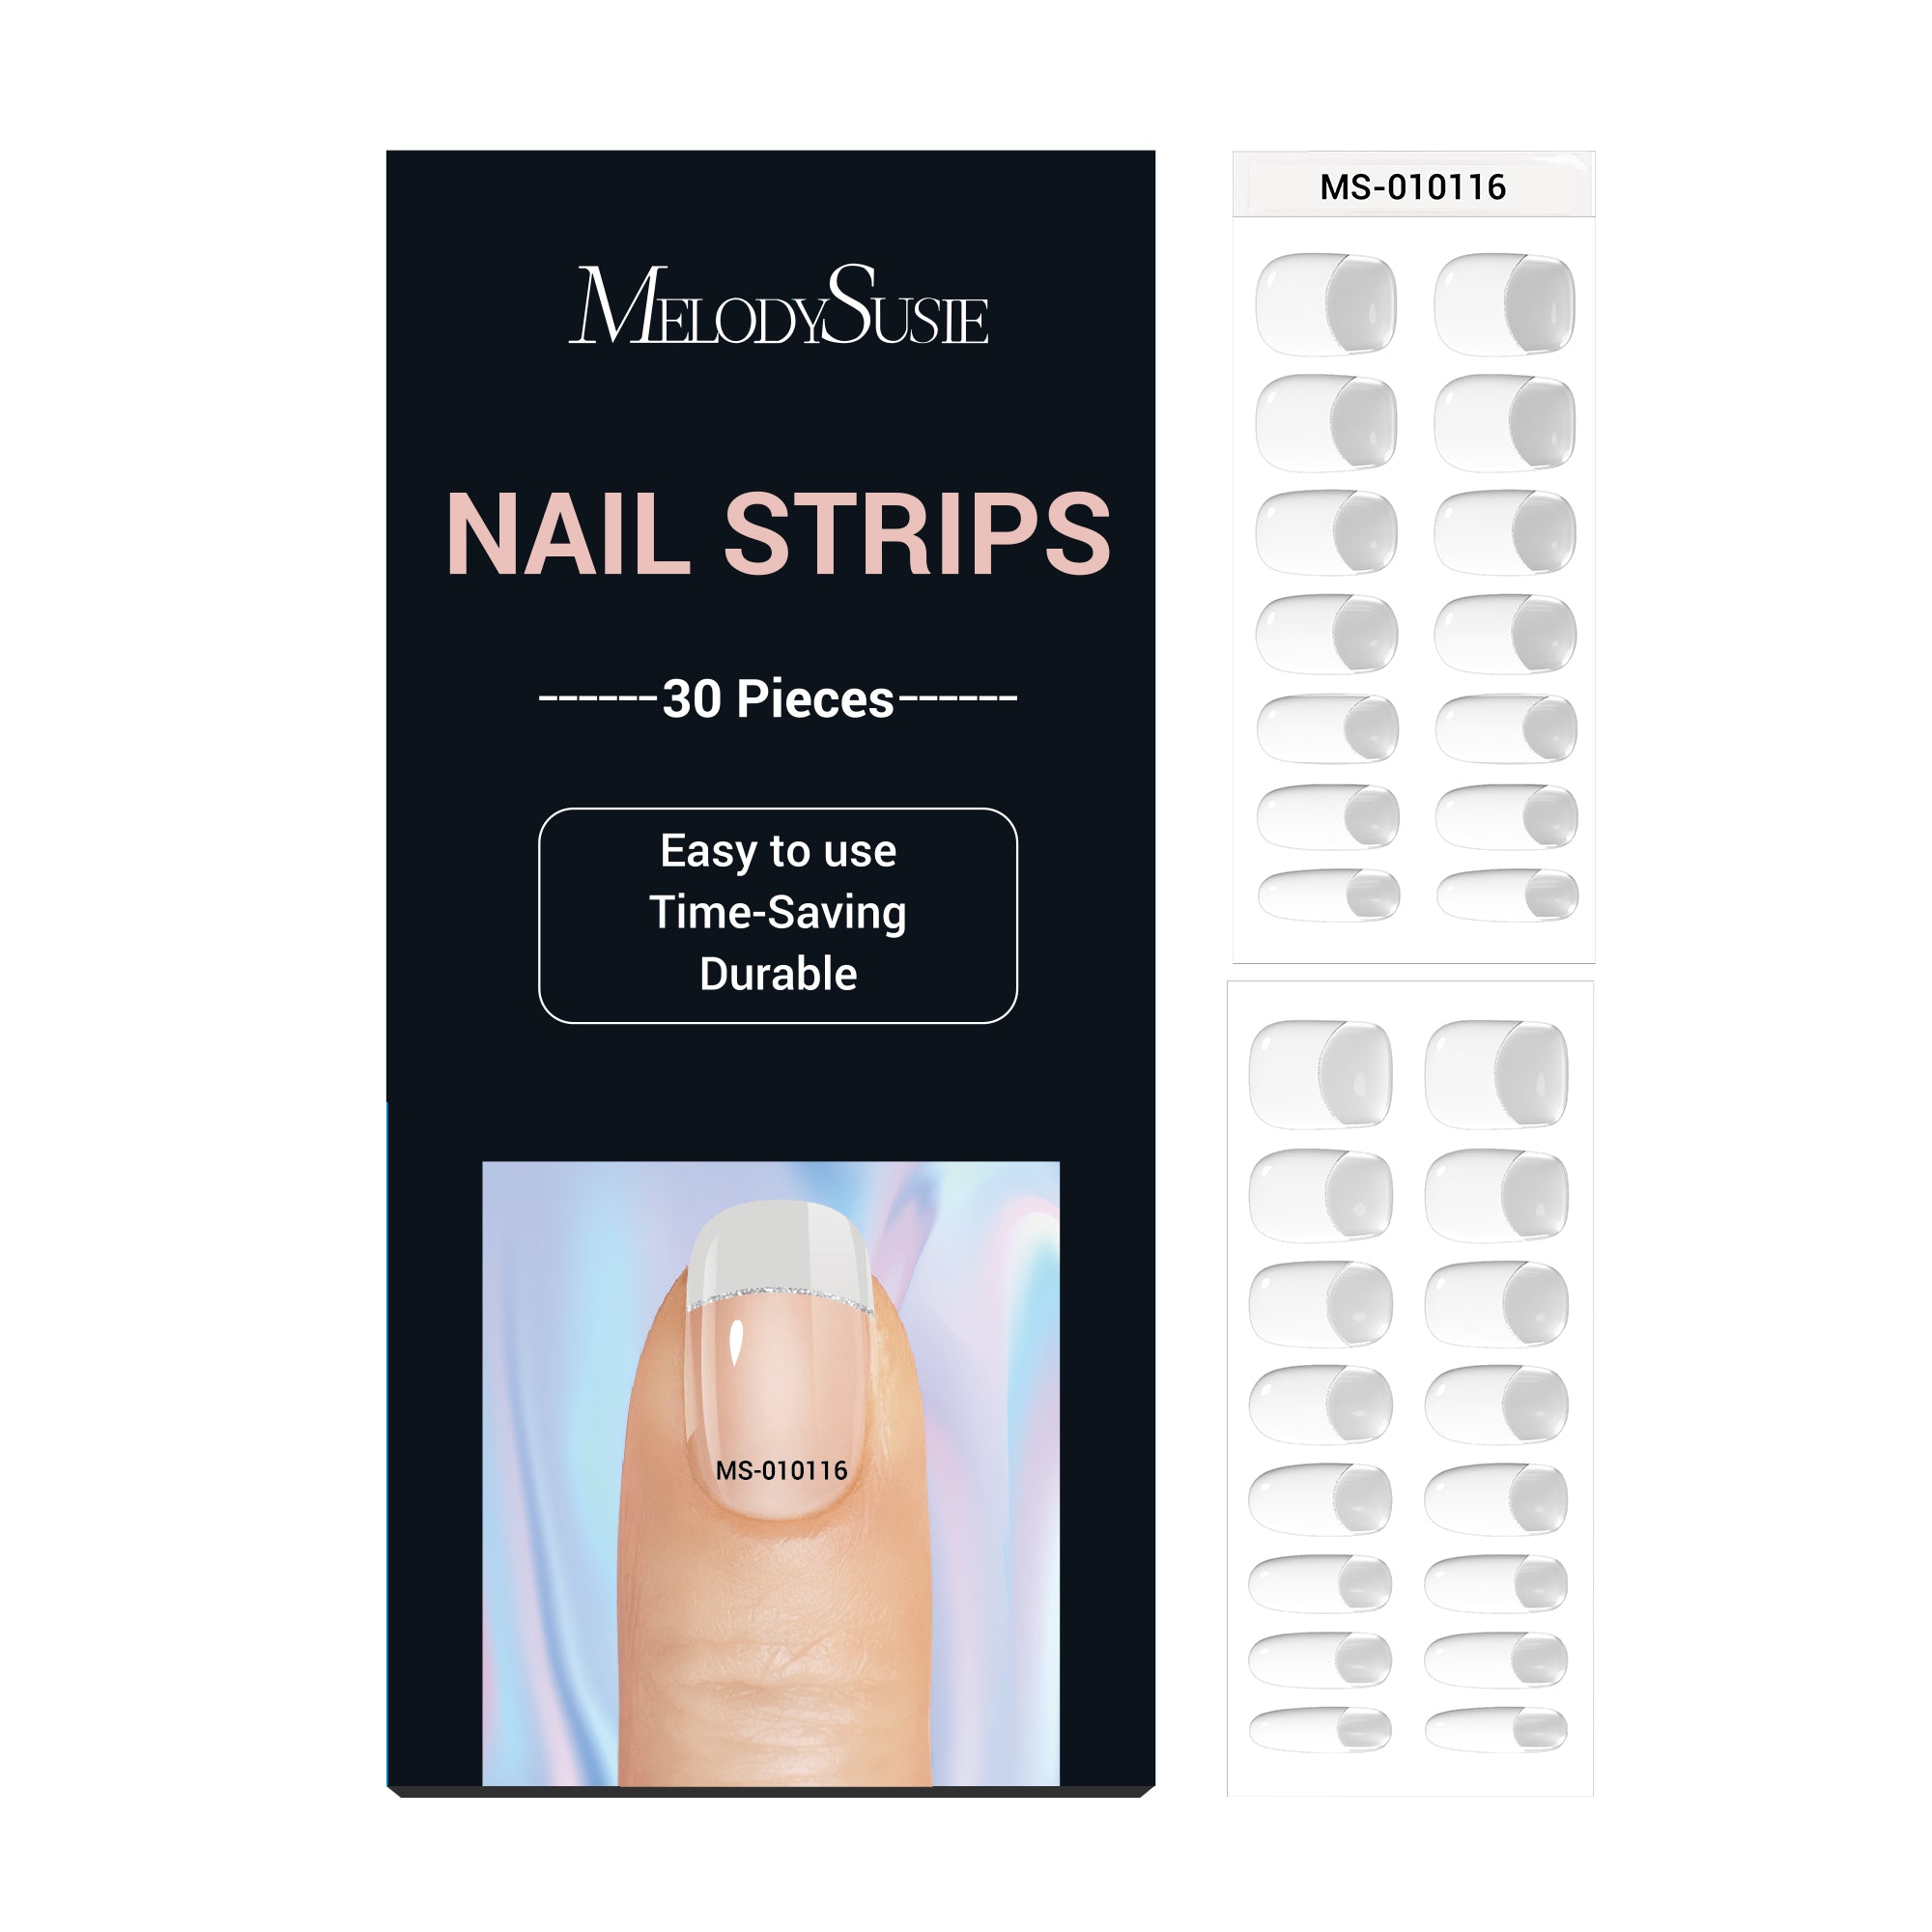 New Semi Cured Gel Nail Strips - US ONLY